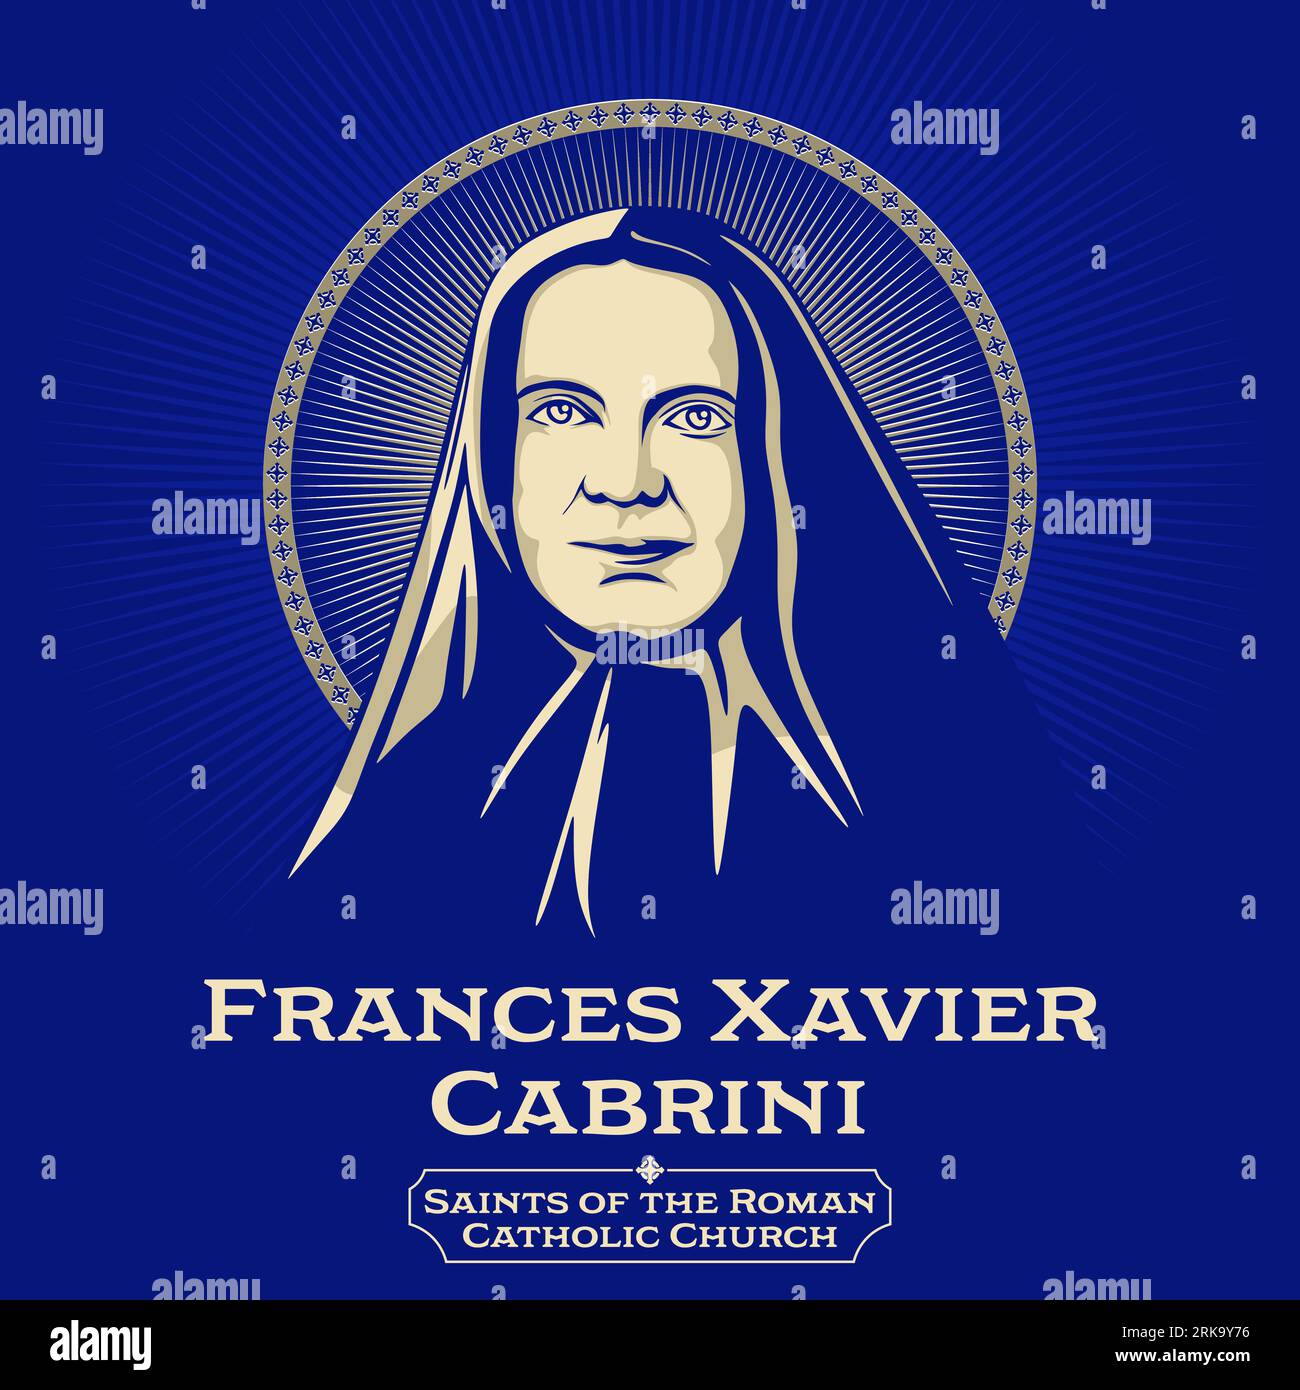 Catholic Saints. Frances Xavier Cabrini (1850-1917) was an Italian-American Catholic religious sister. She founded the Missionary Sisters Stock Vector